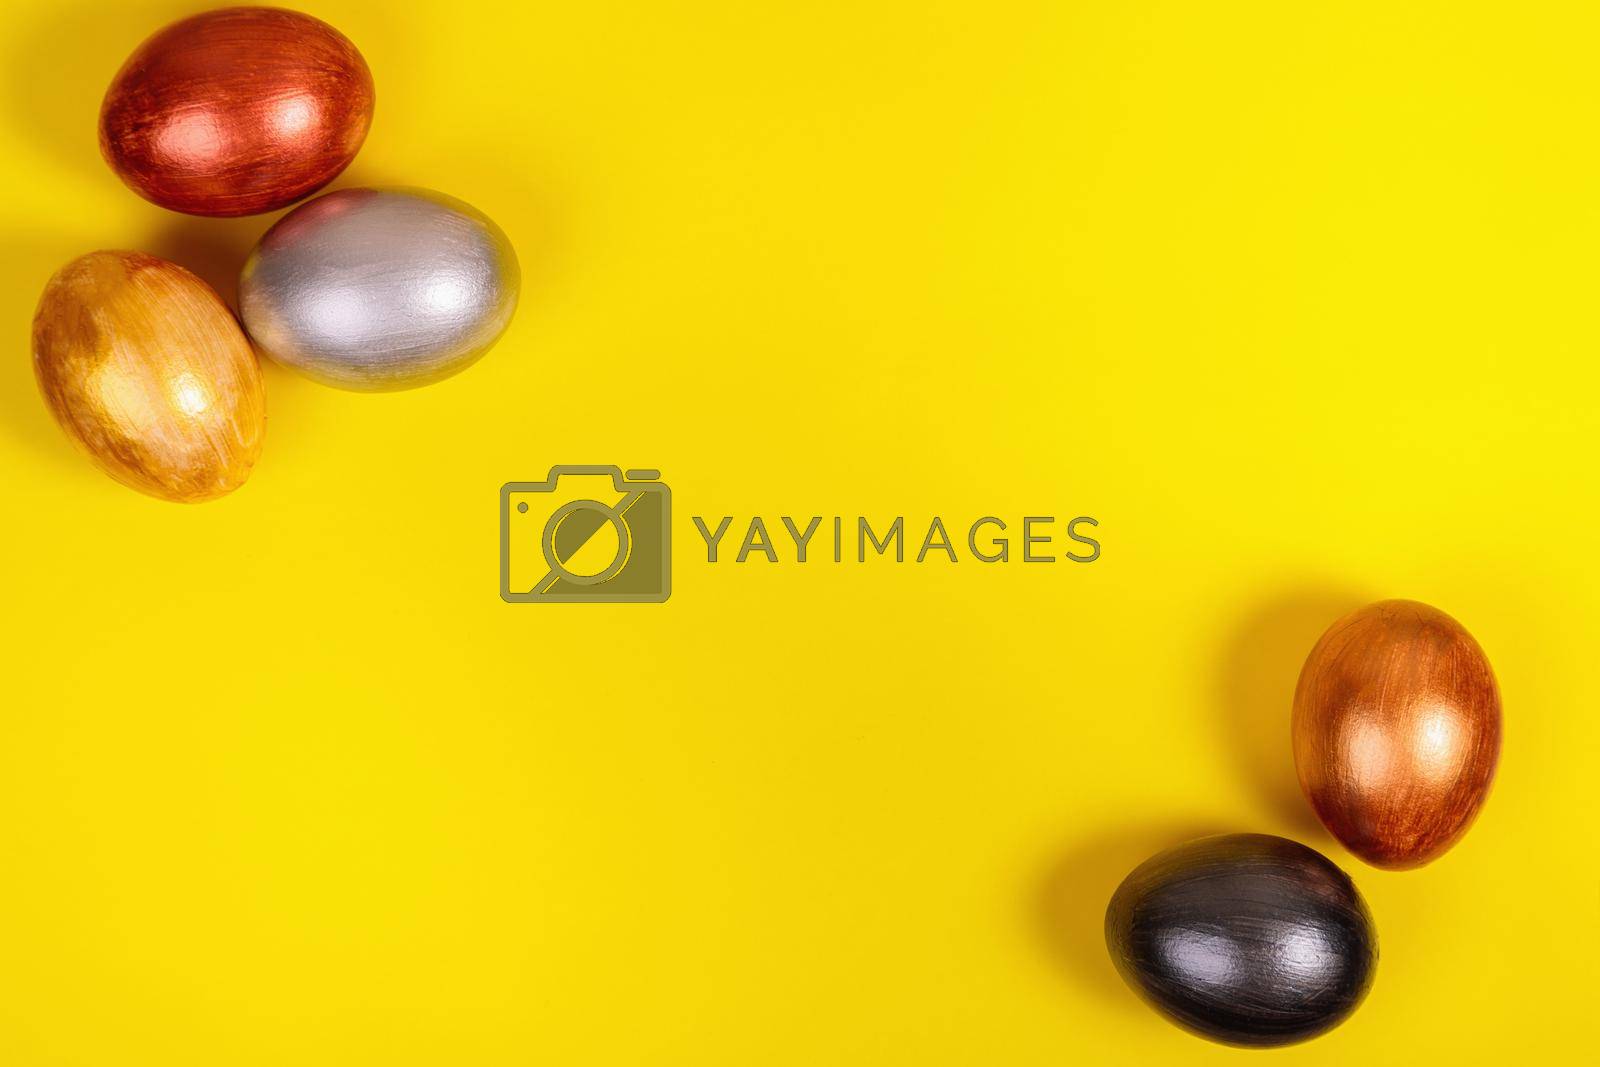 Royalty free image of Multi-colored eggs on a uniform yellow background with place for text. by Yurich32